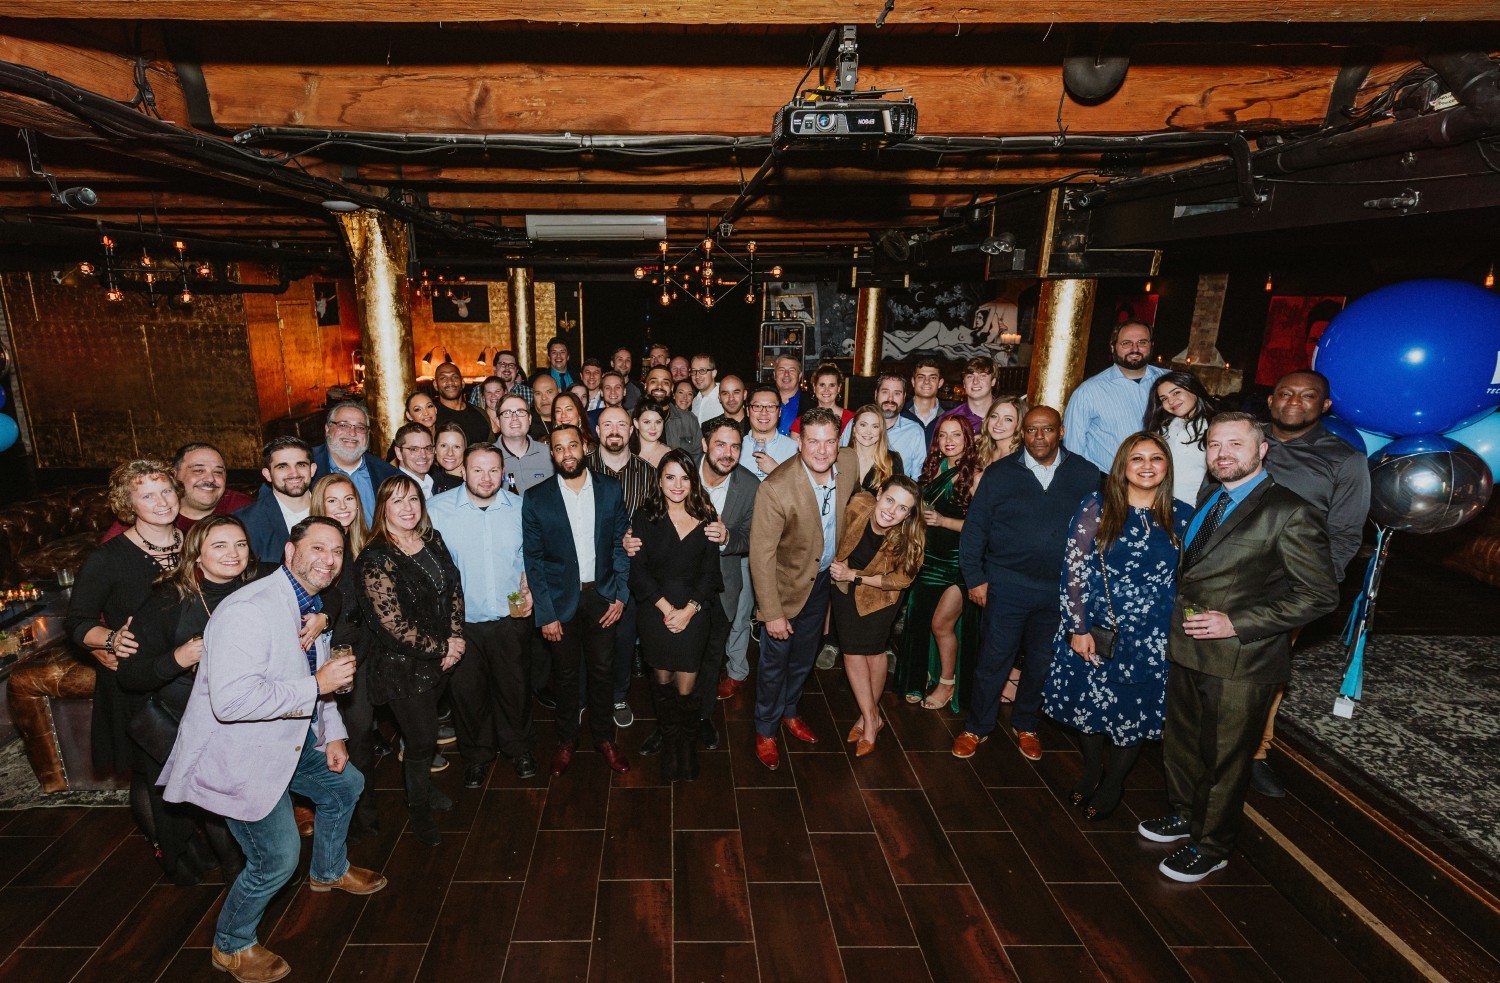 All company group photo from 2021 holiday party